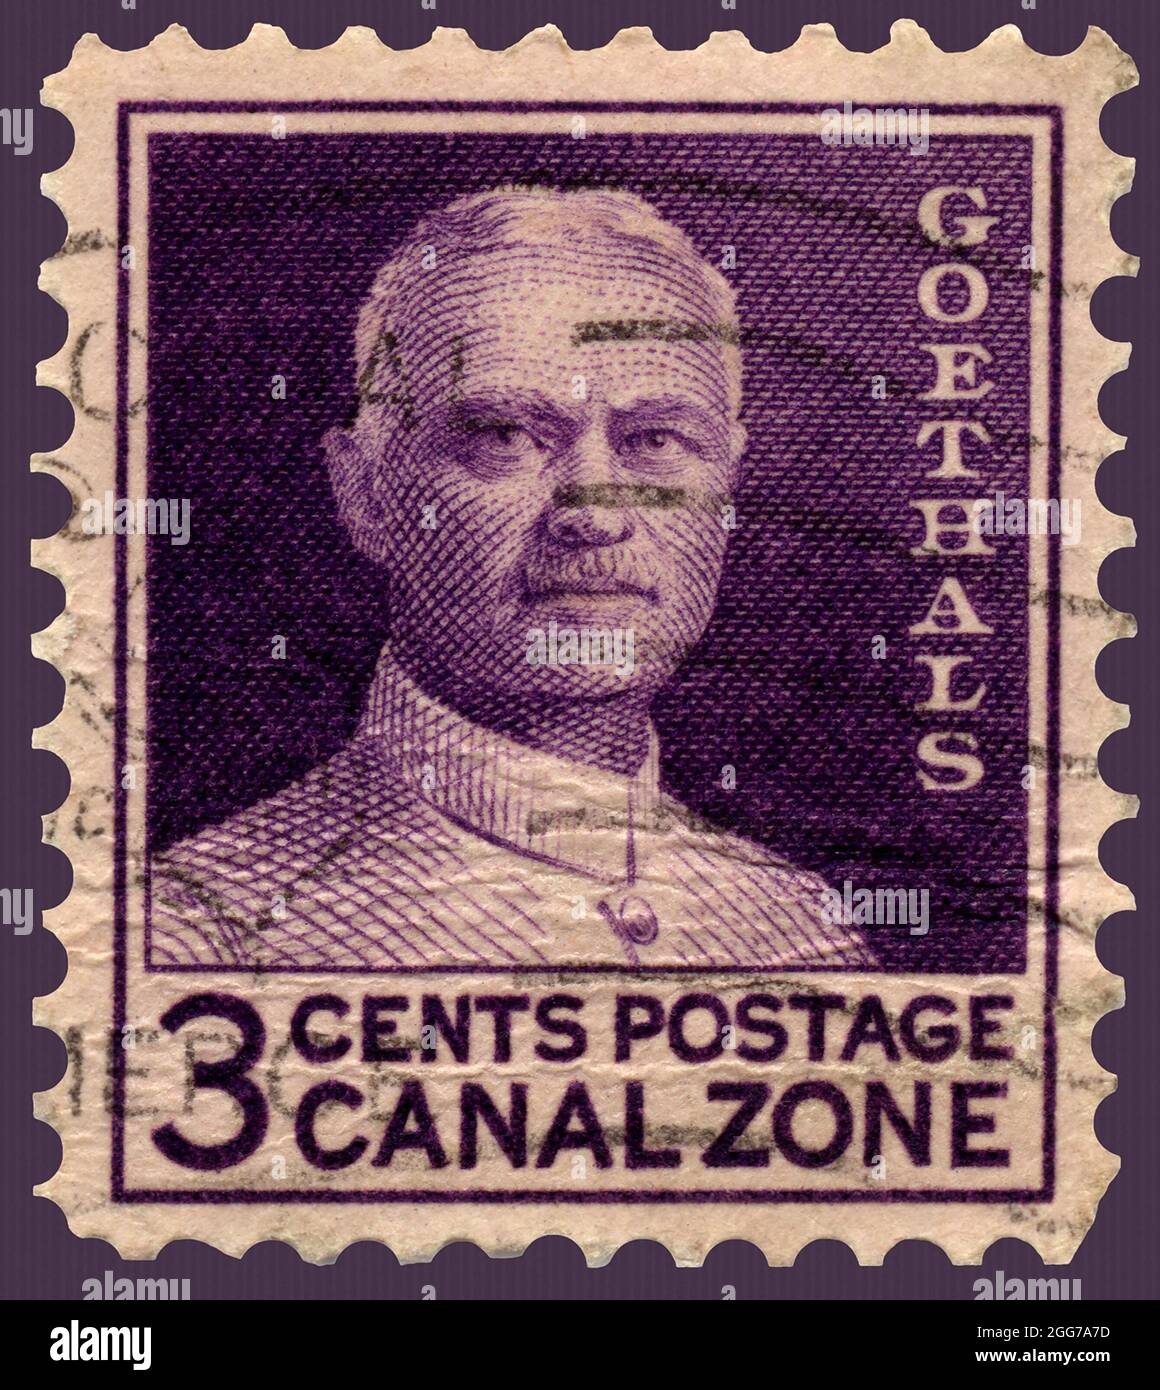 Goethals Canal Zone Postage Stamp. Stock Photo